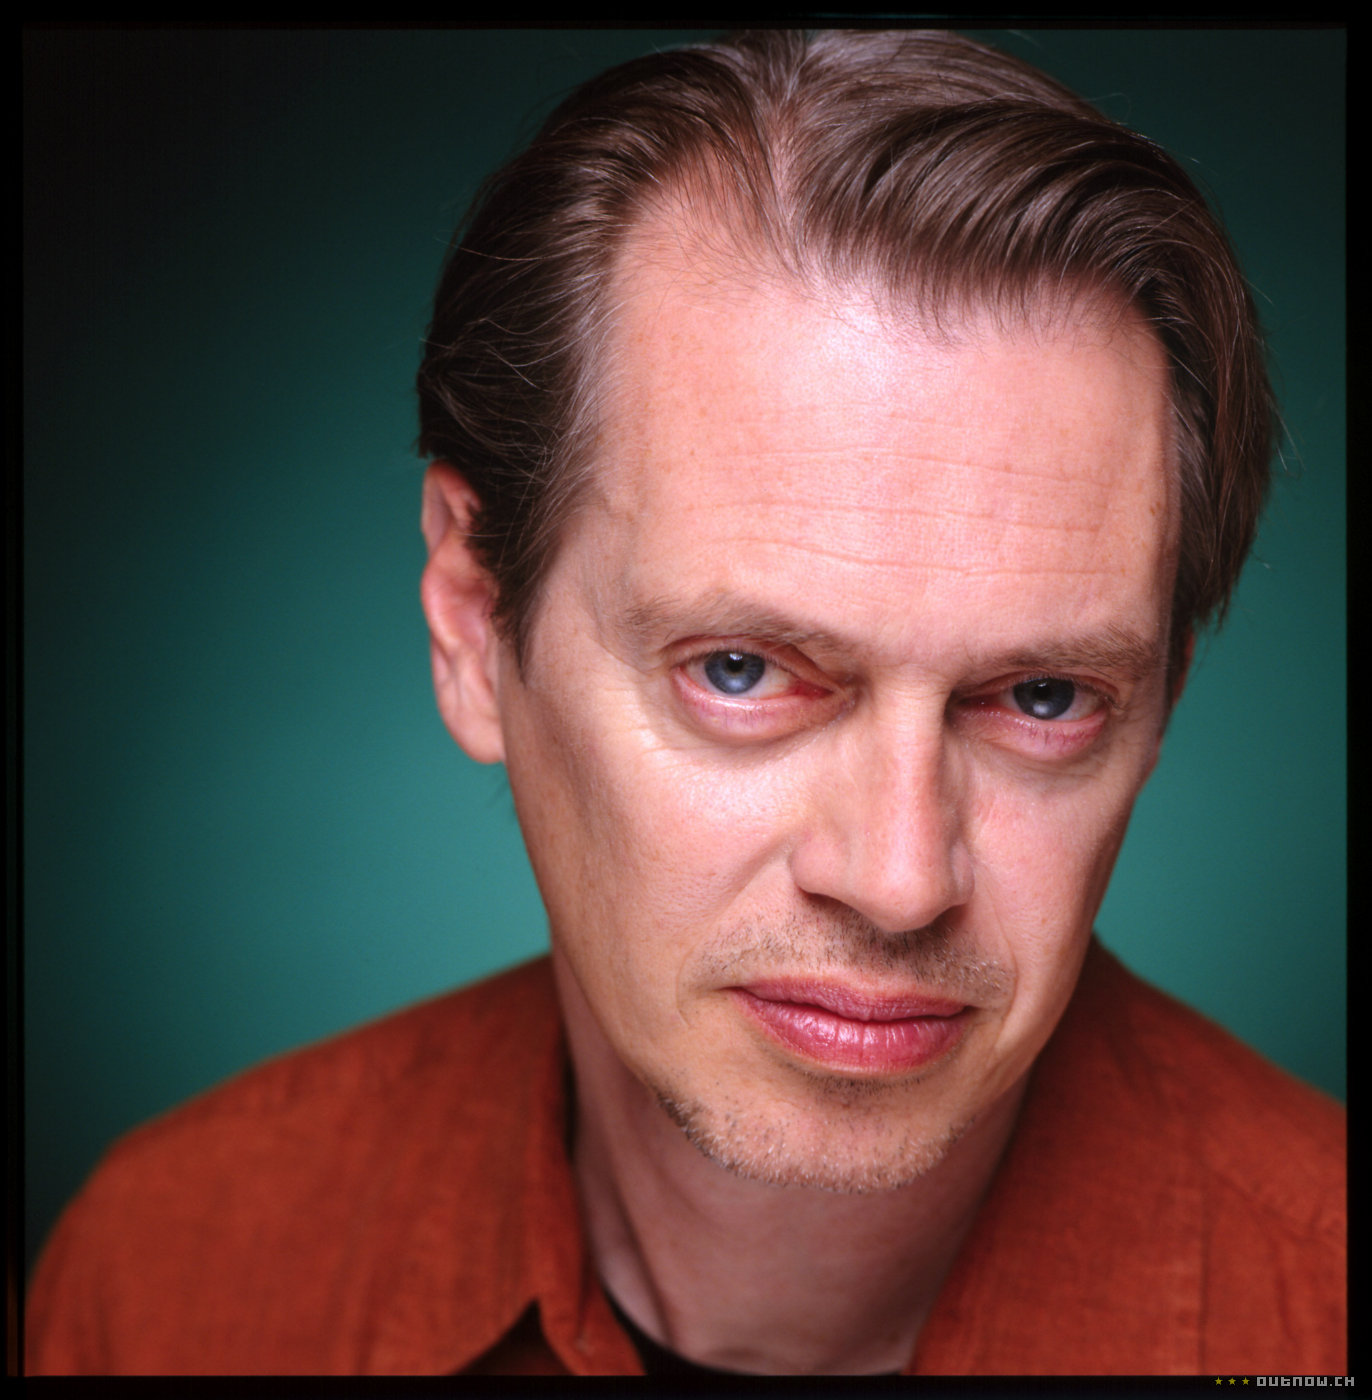 Not+sure+if+supposed+to+be+steve+buscemi+or+not+_99309ea9a4406dfa2f3f9748eff86cbb.jpg